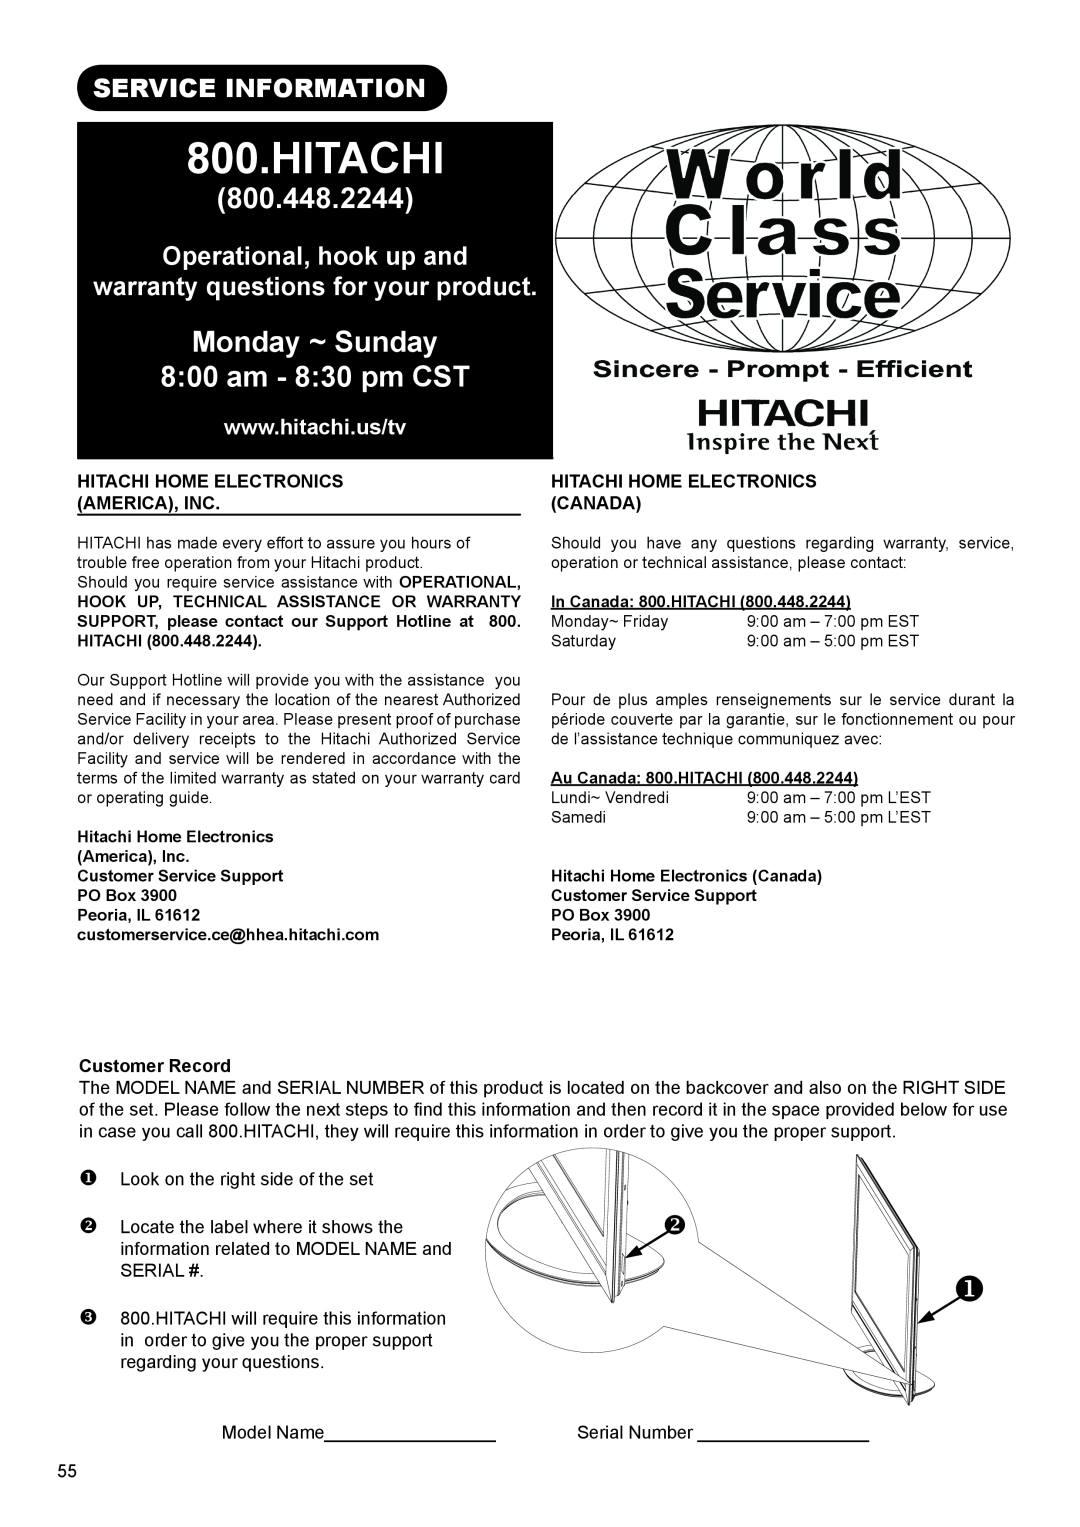 Hitachi UT42X902 manual Service Information, Operational, hook up and warranty questions for your product, Customer Record 